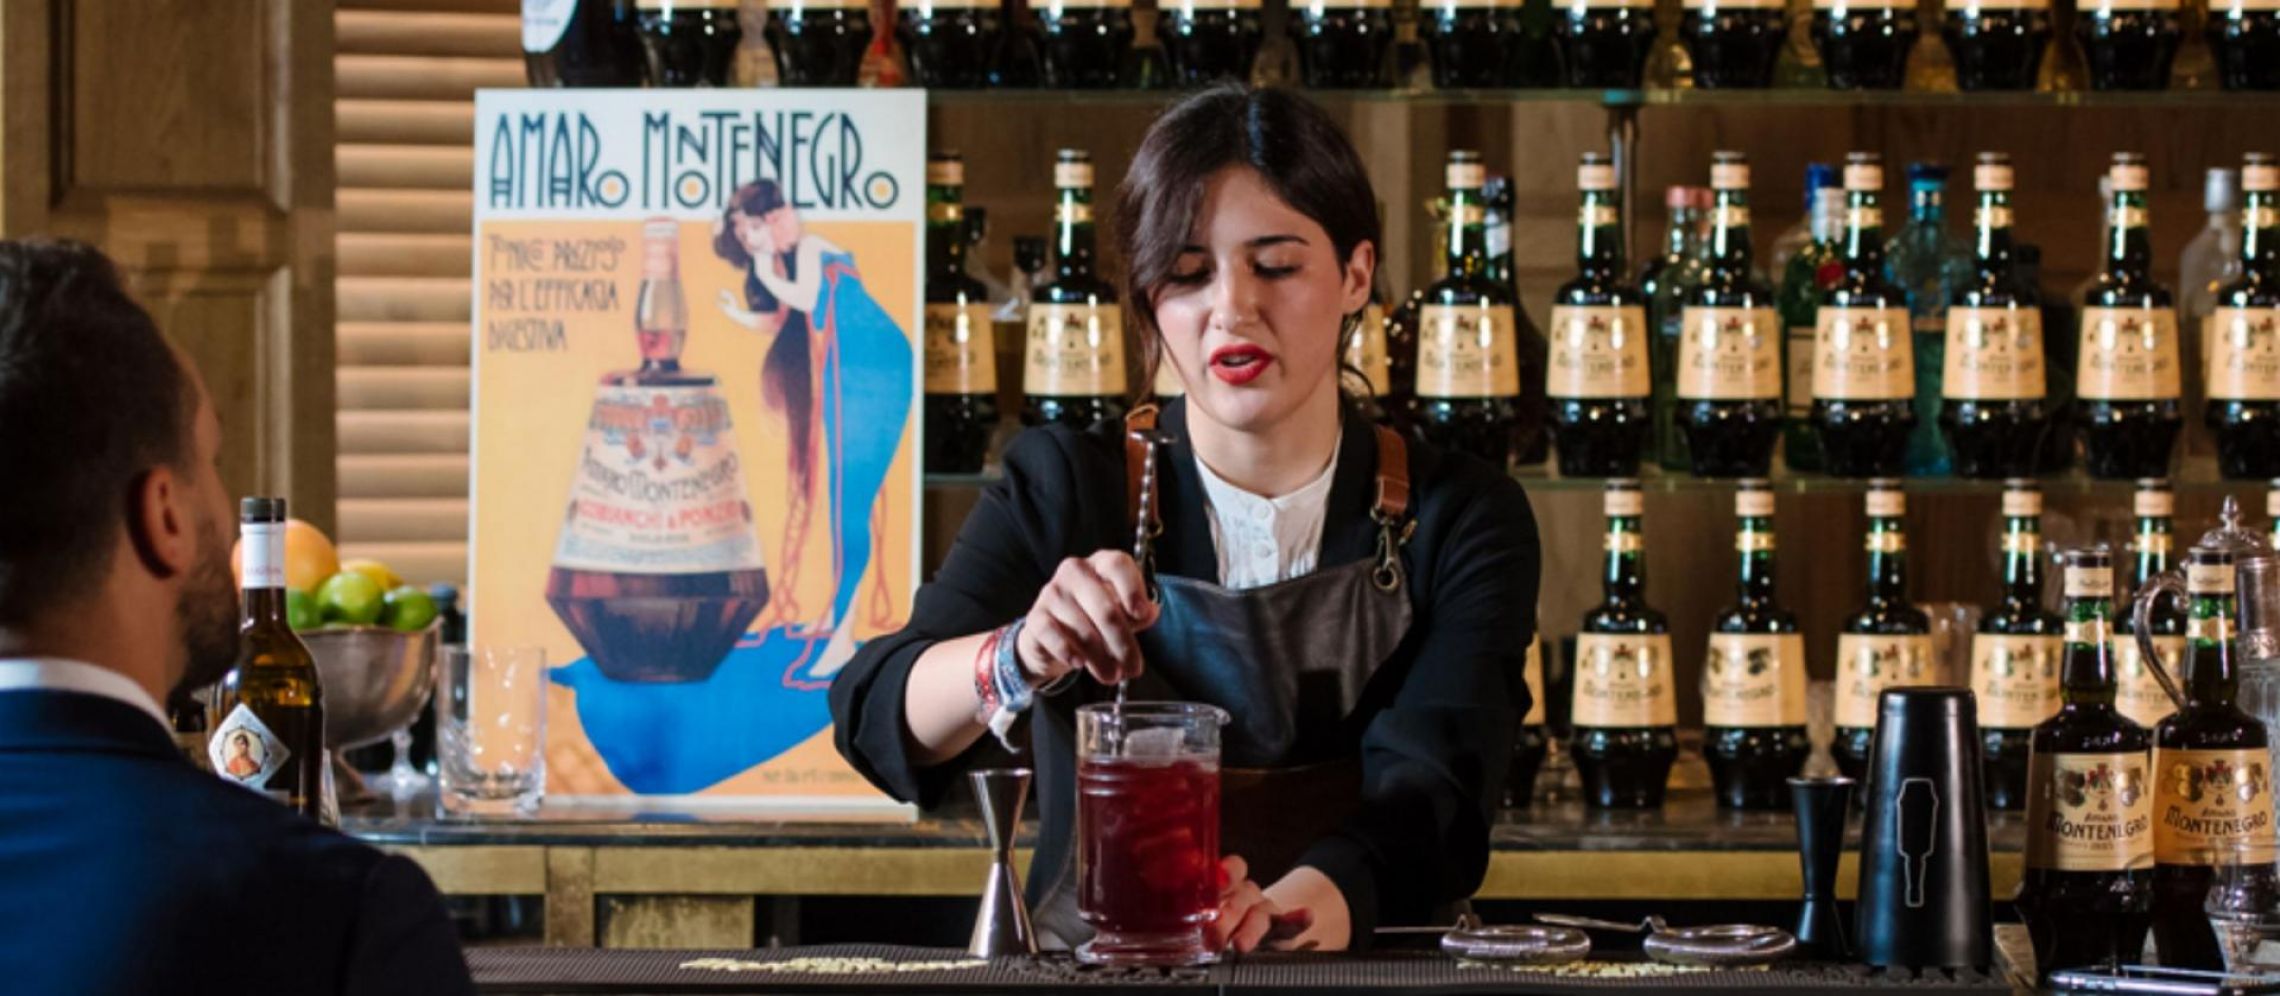 Photo for: Cristiana Pirinu on Day-to-Day Role of a Bar Supervisor at Donovan Bar